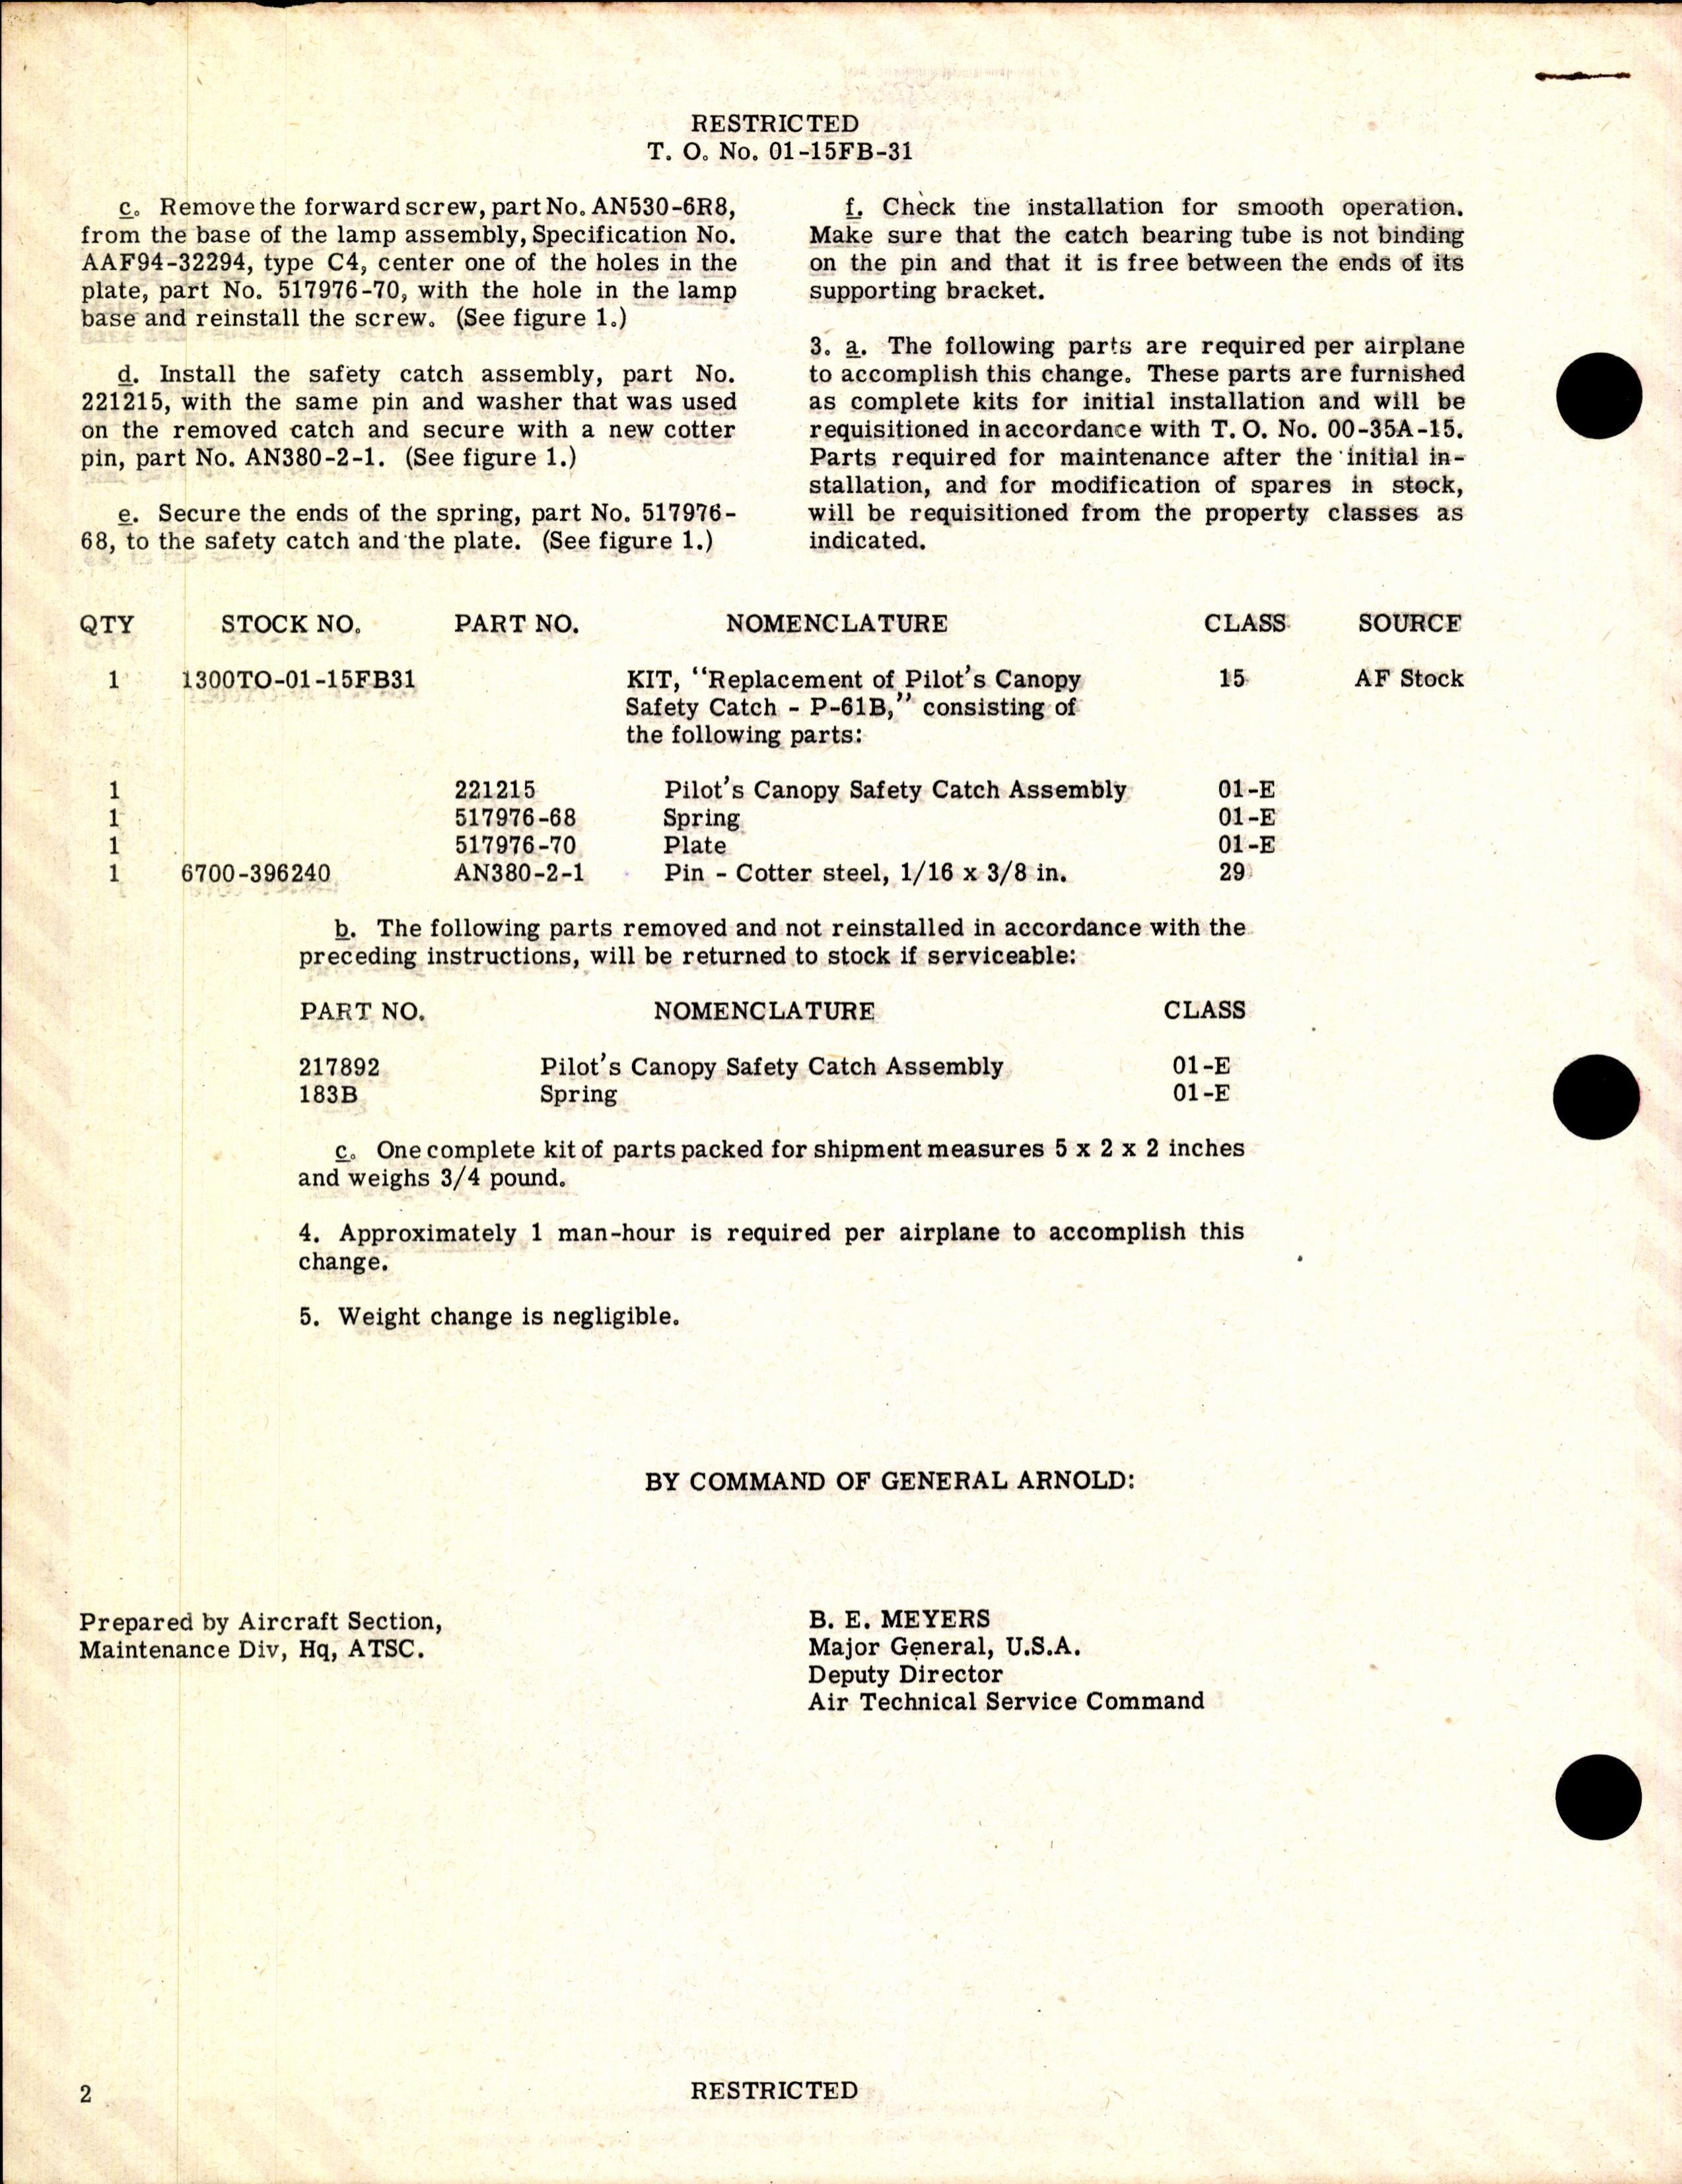 Sample page 2 from AirCorps Library document: Replacement of Pilot's Canopy Safety Catch for P-61B